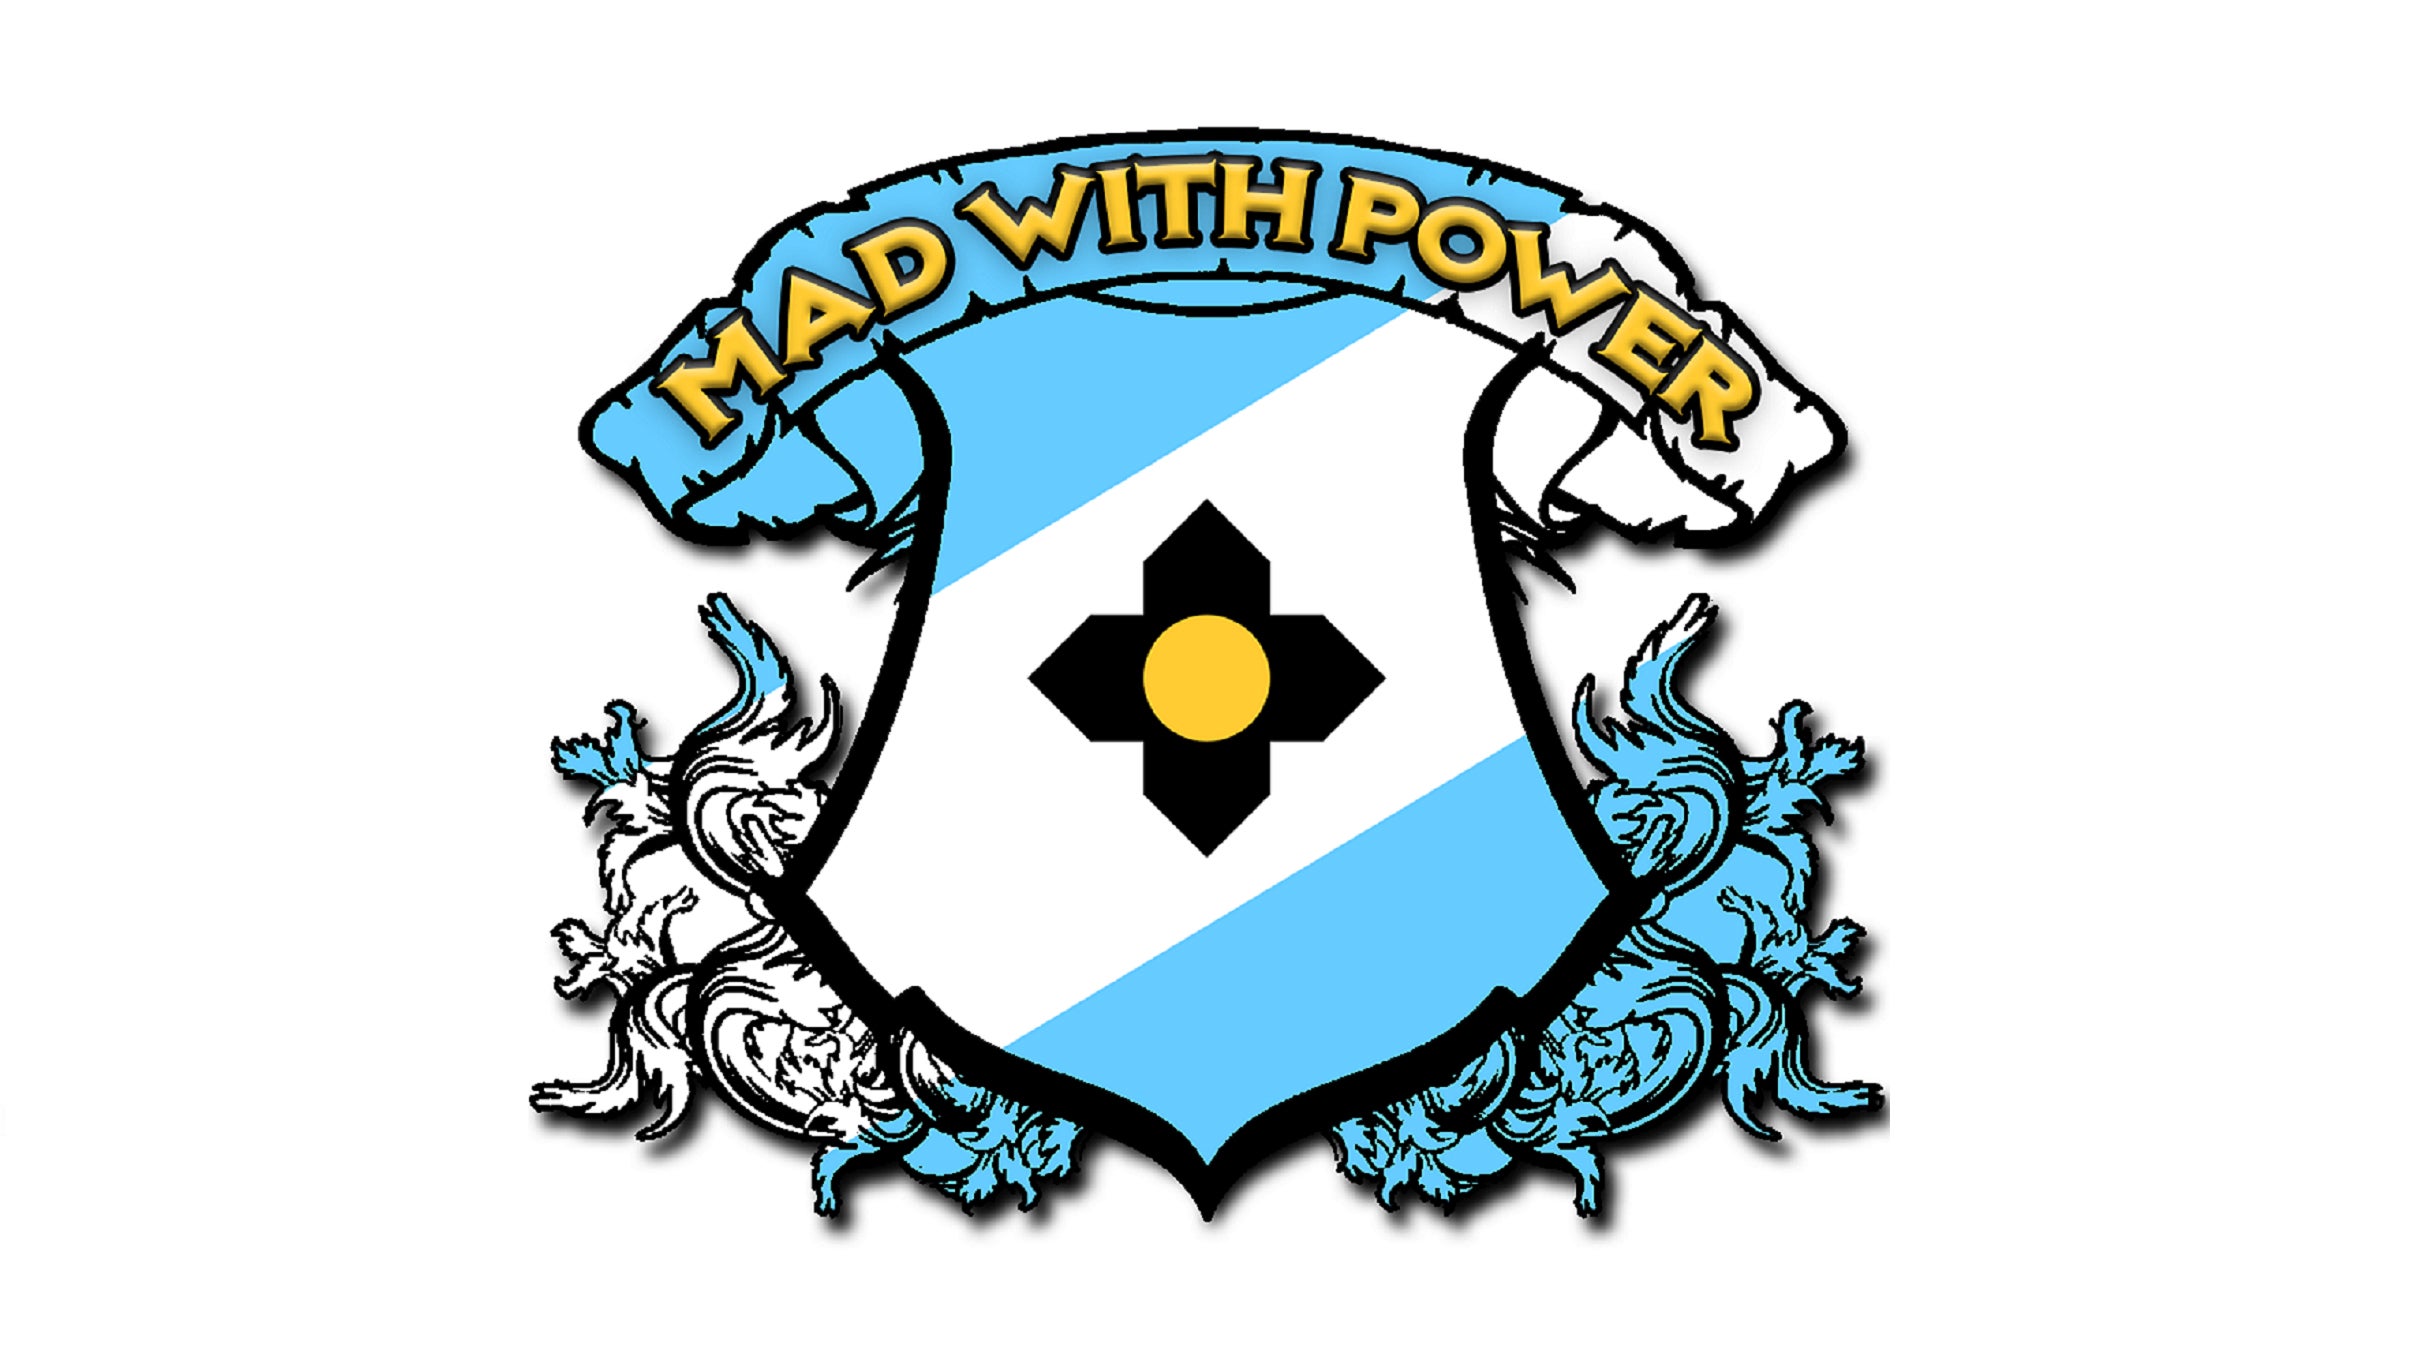 Mad With Power Fest free presale code for event tickets in Madison, WI (The Sylvee)